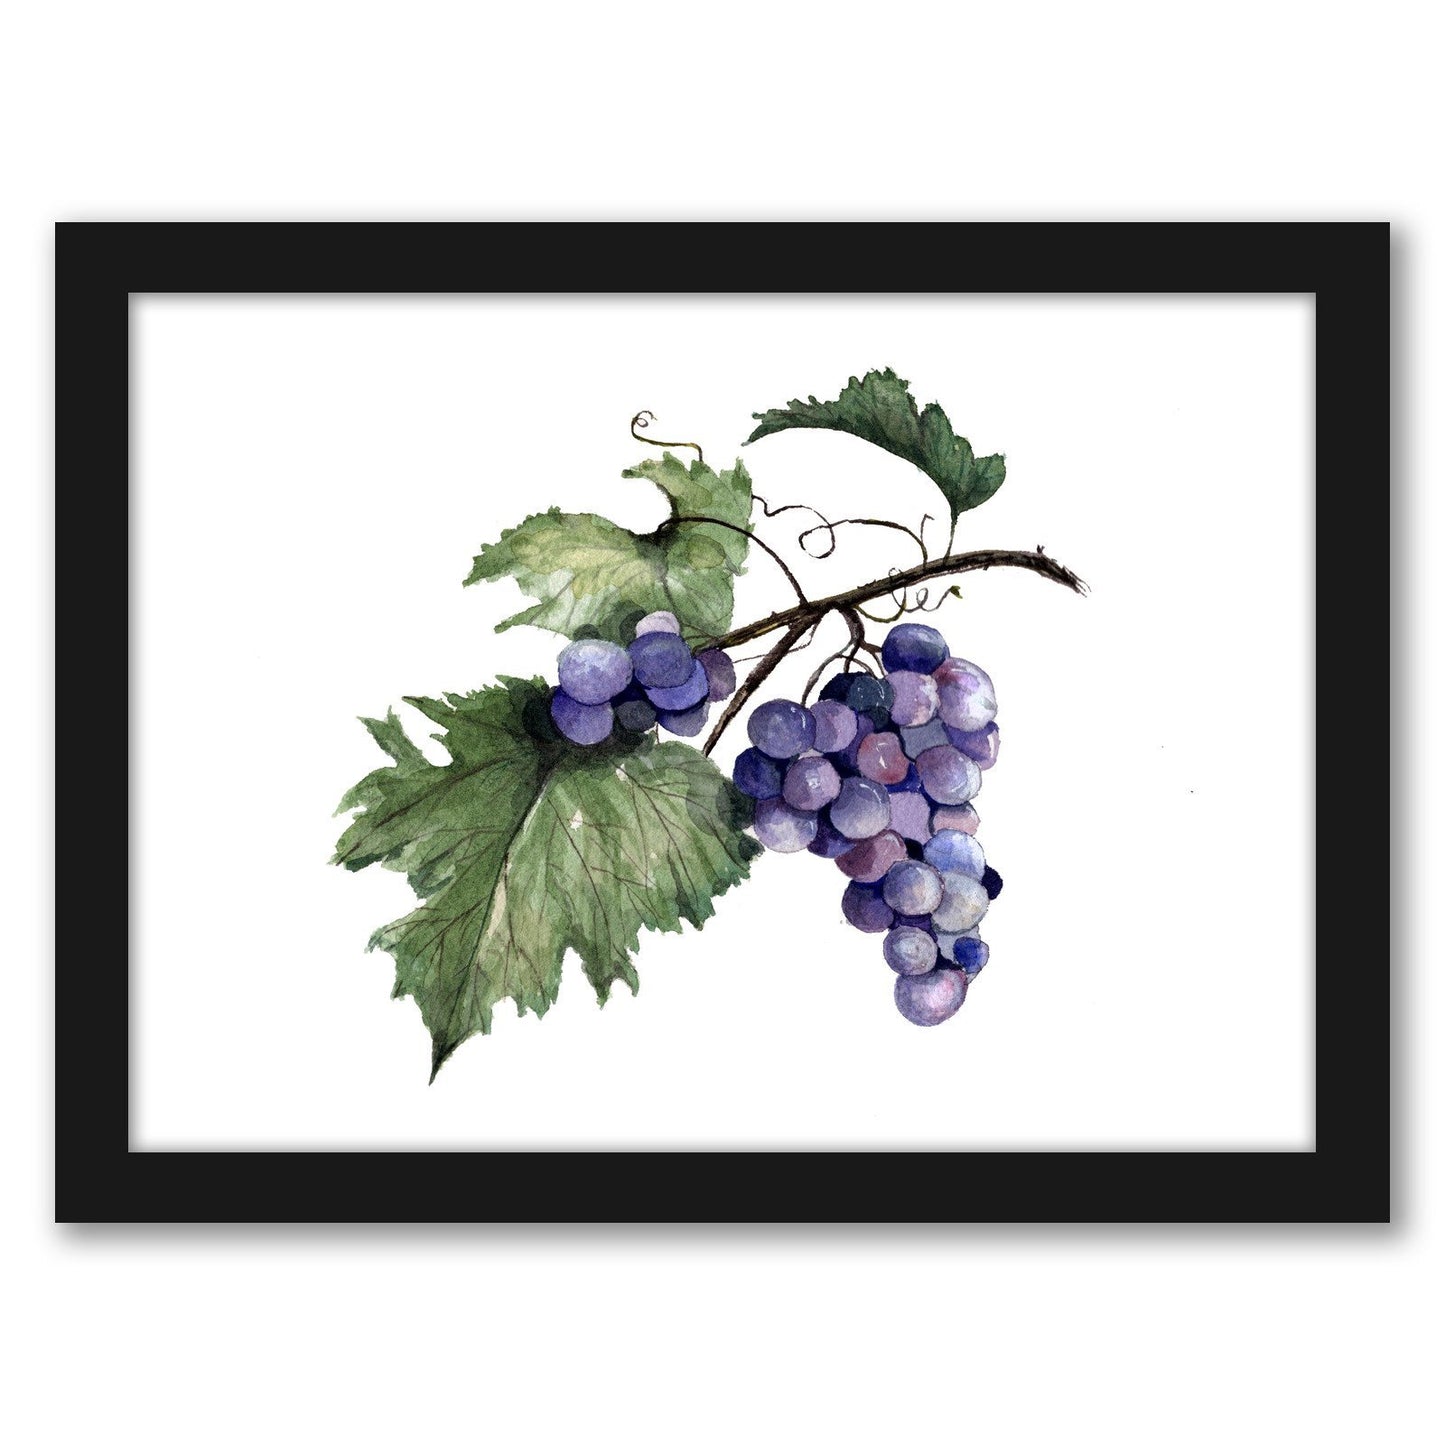 Grapes by Cami Monet - Framed Print - Americanflat